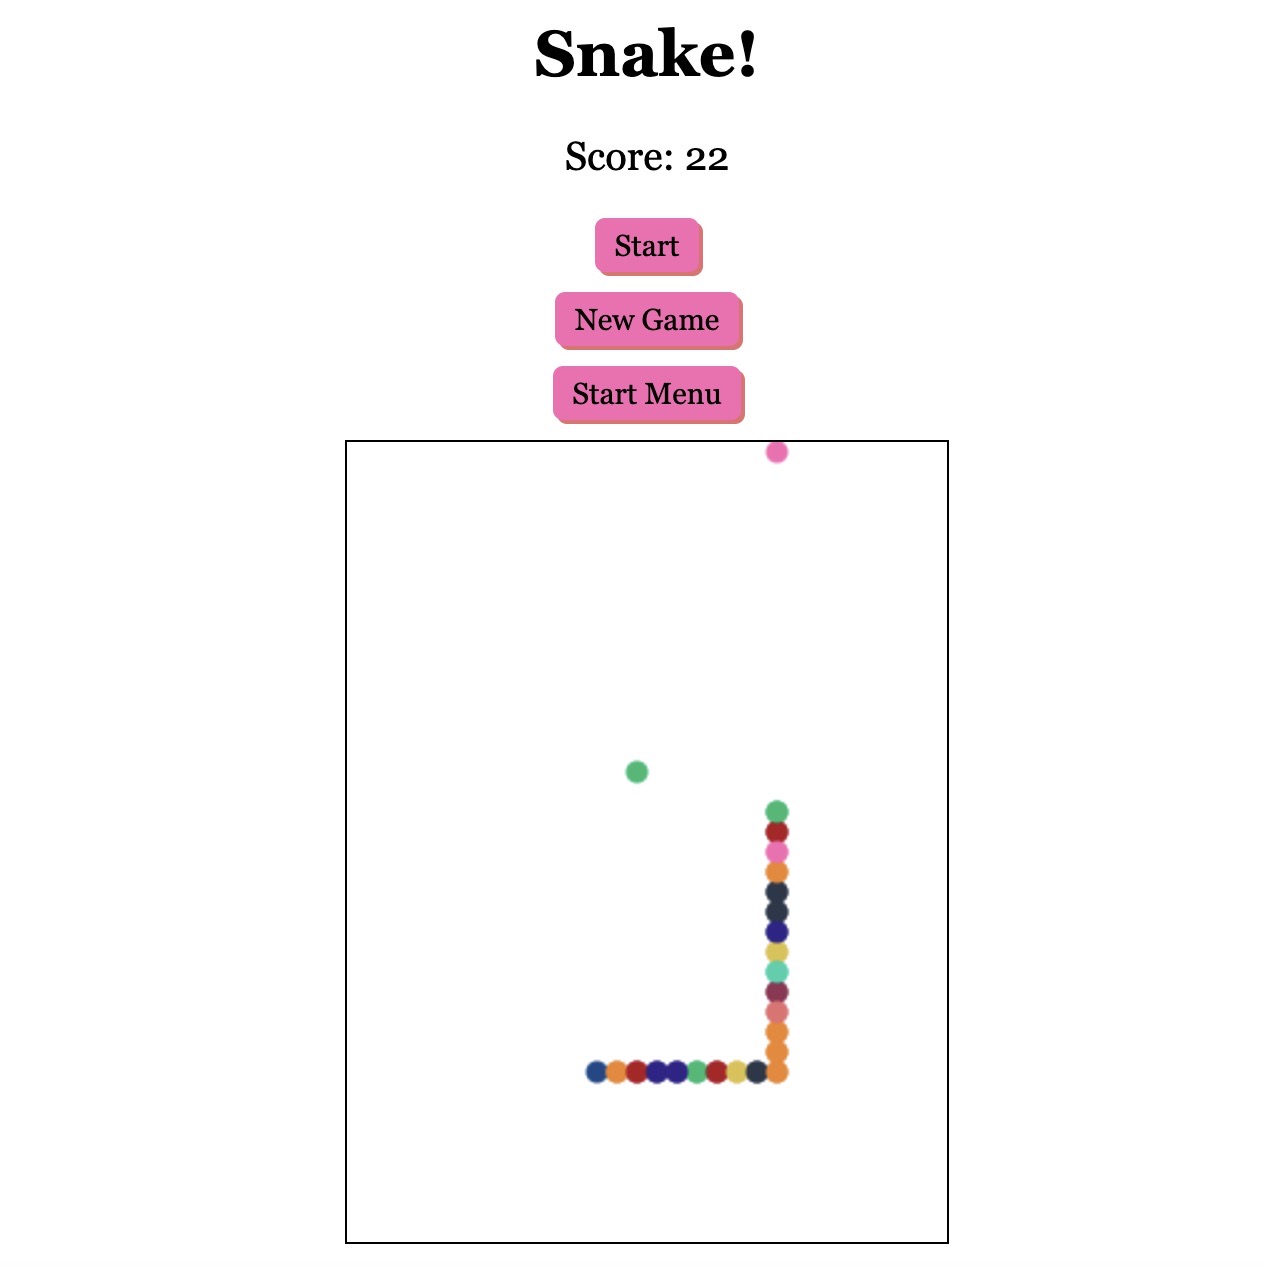 A picture of a dupe of the game Snake. It has a tile of Snake, a score display, and three buttons labeled Start, New Game, and Start Menu, as well as rectangular space that has a line of connected dots and two dots elseware.